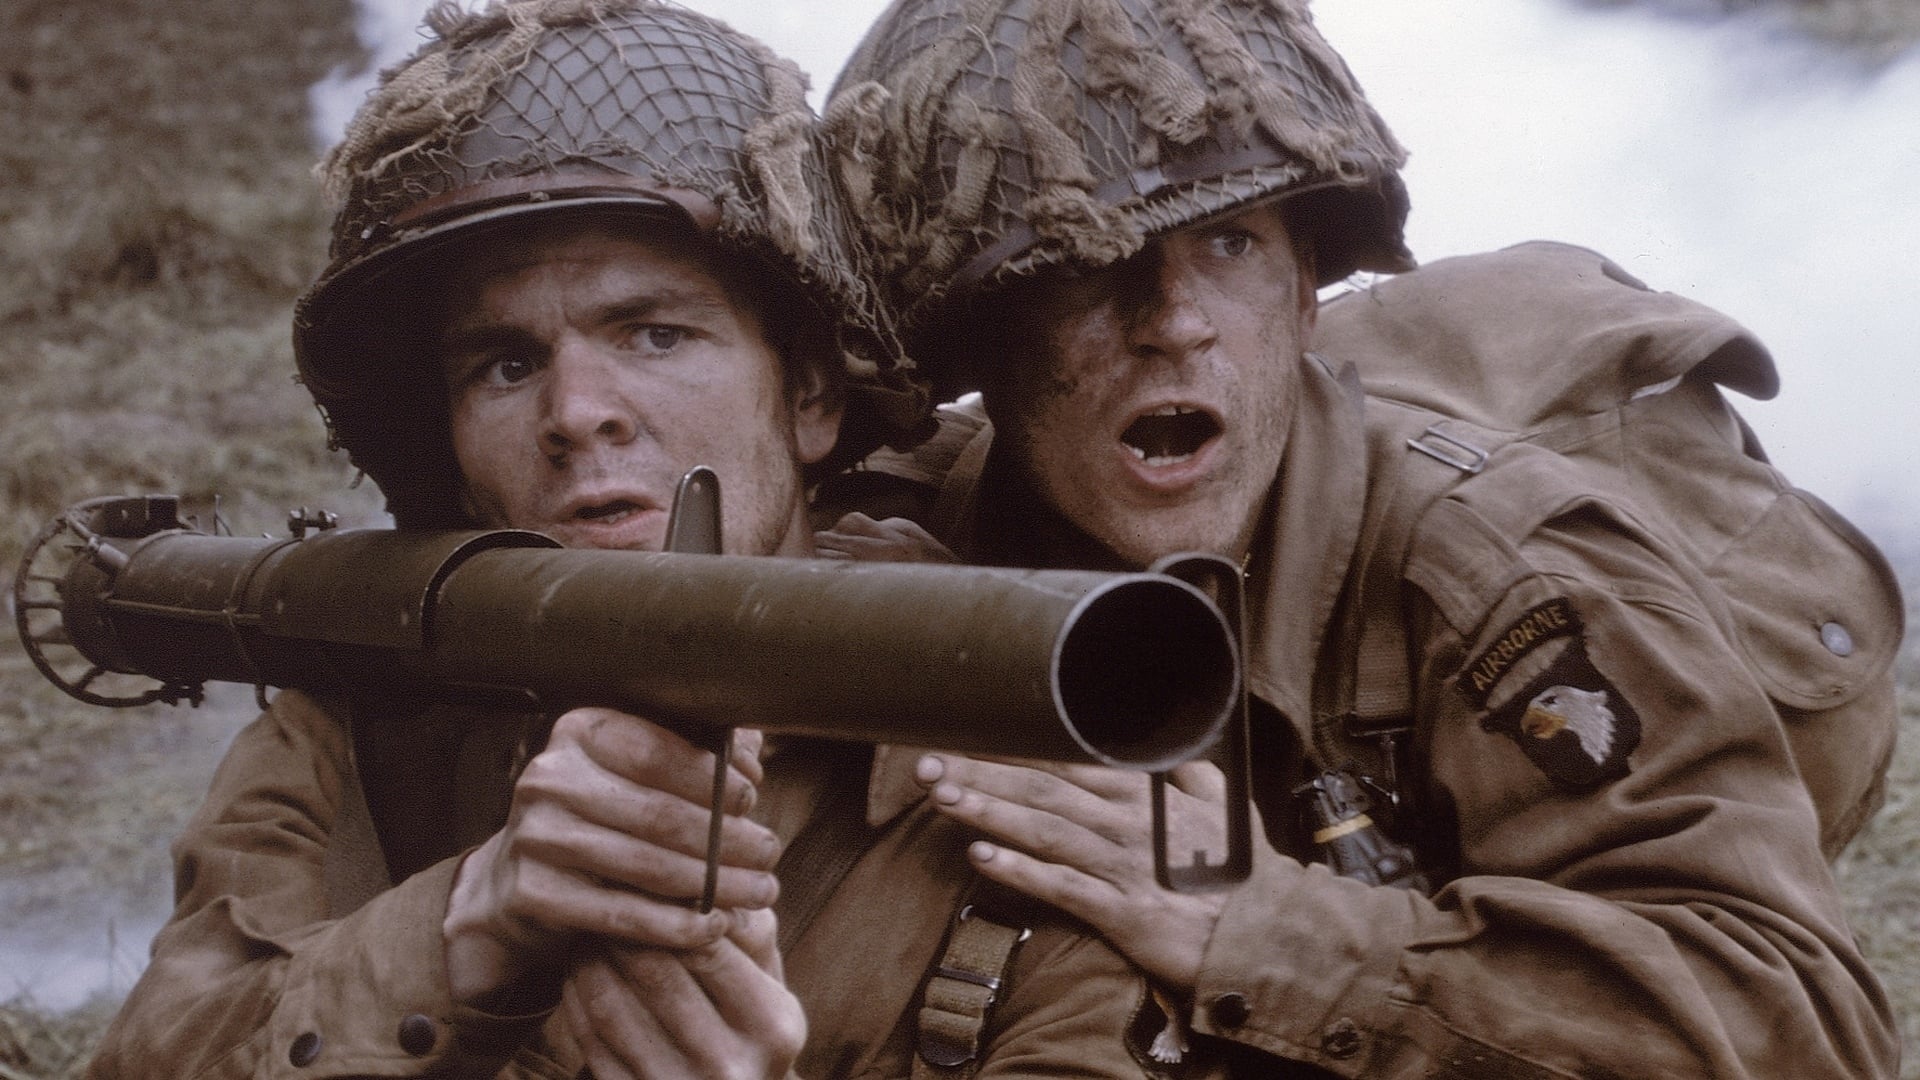 Band of Brothers Season 1 Episode 3 Watch Full Episode